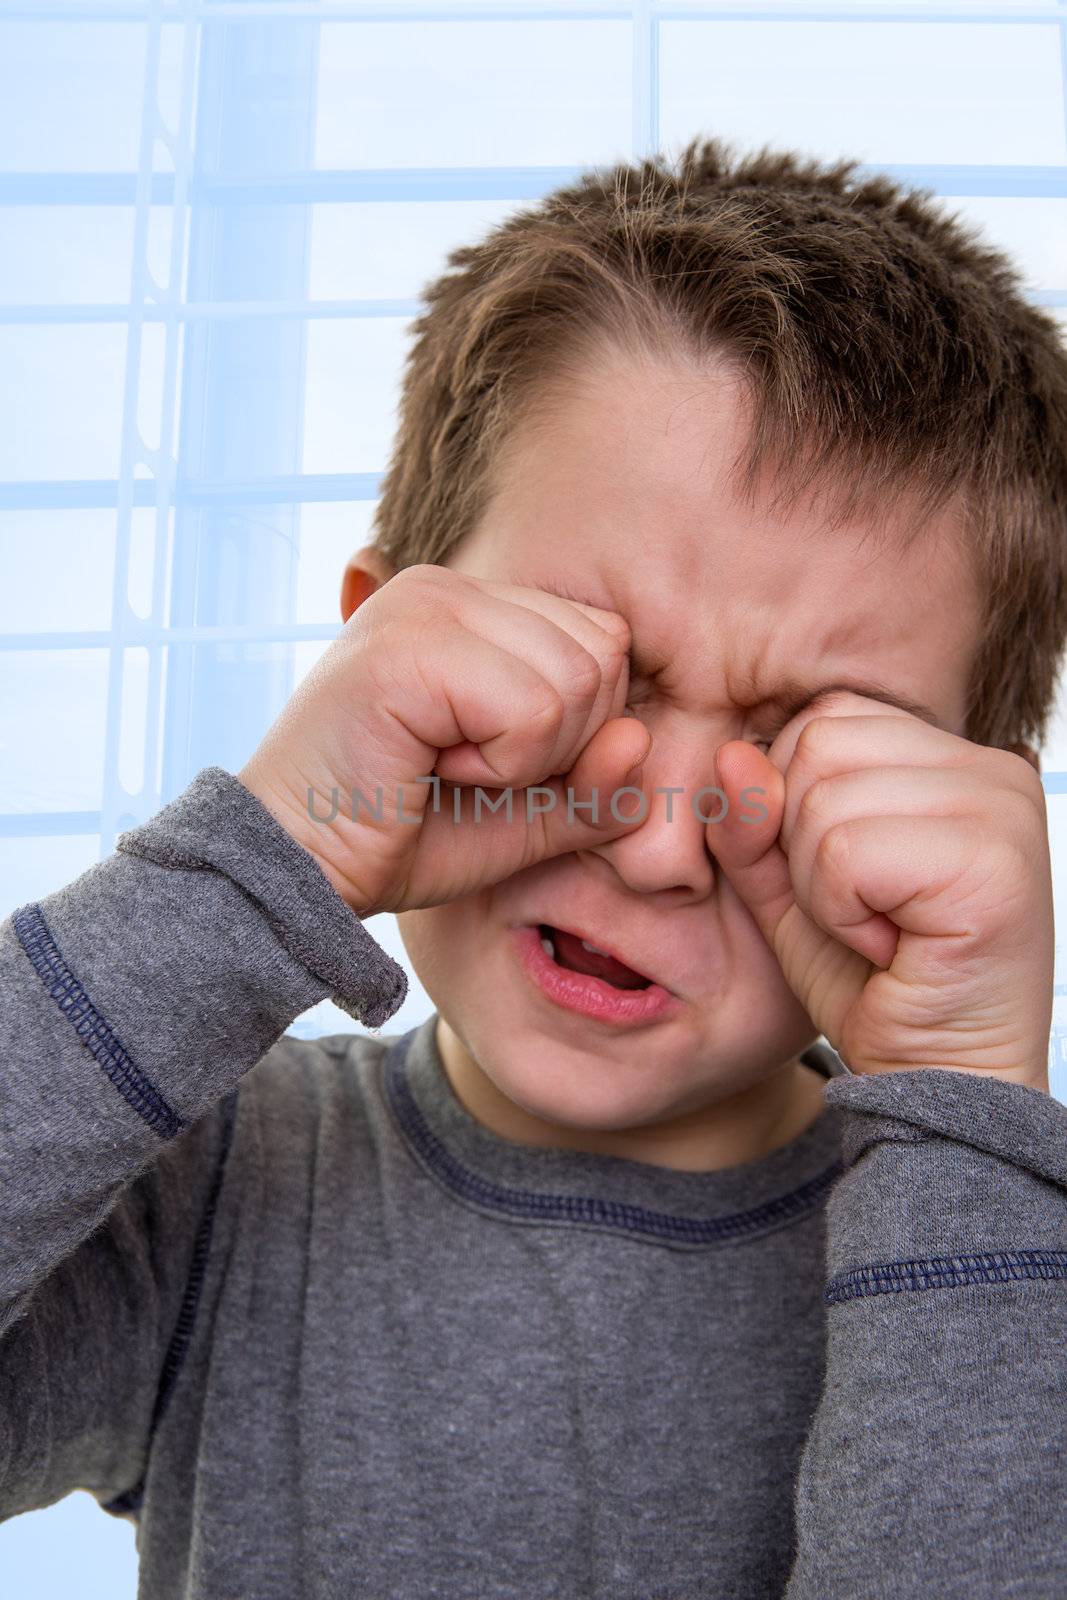 Kid Crying with Hands on his Face by coskun